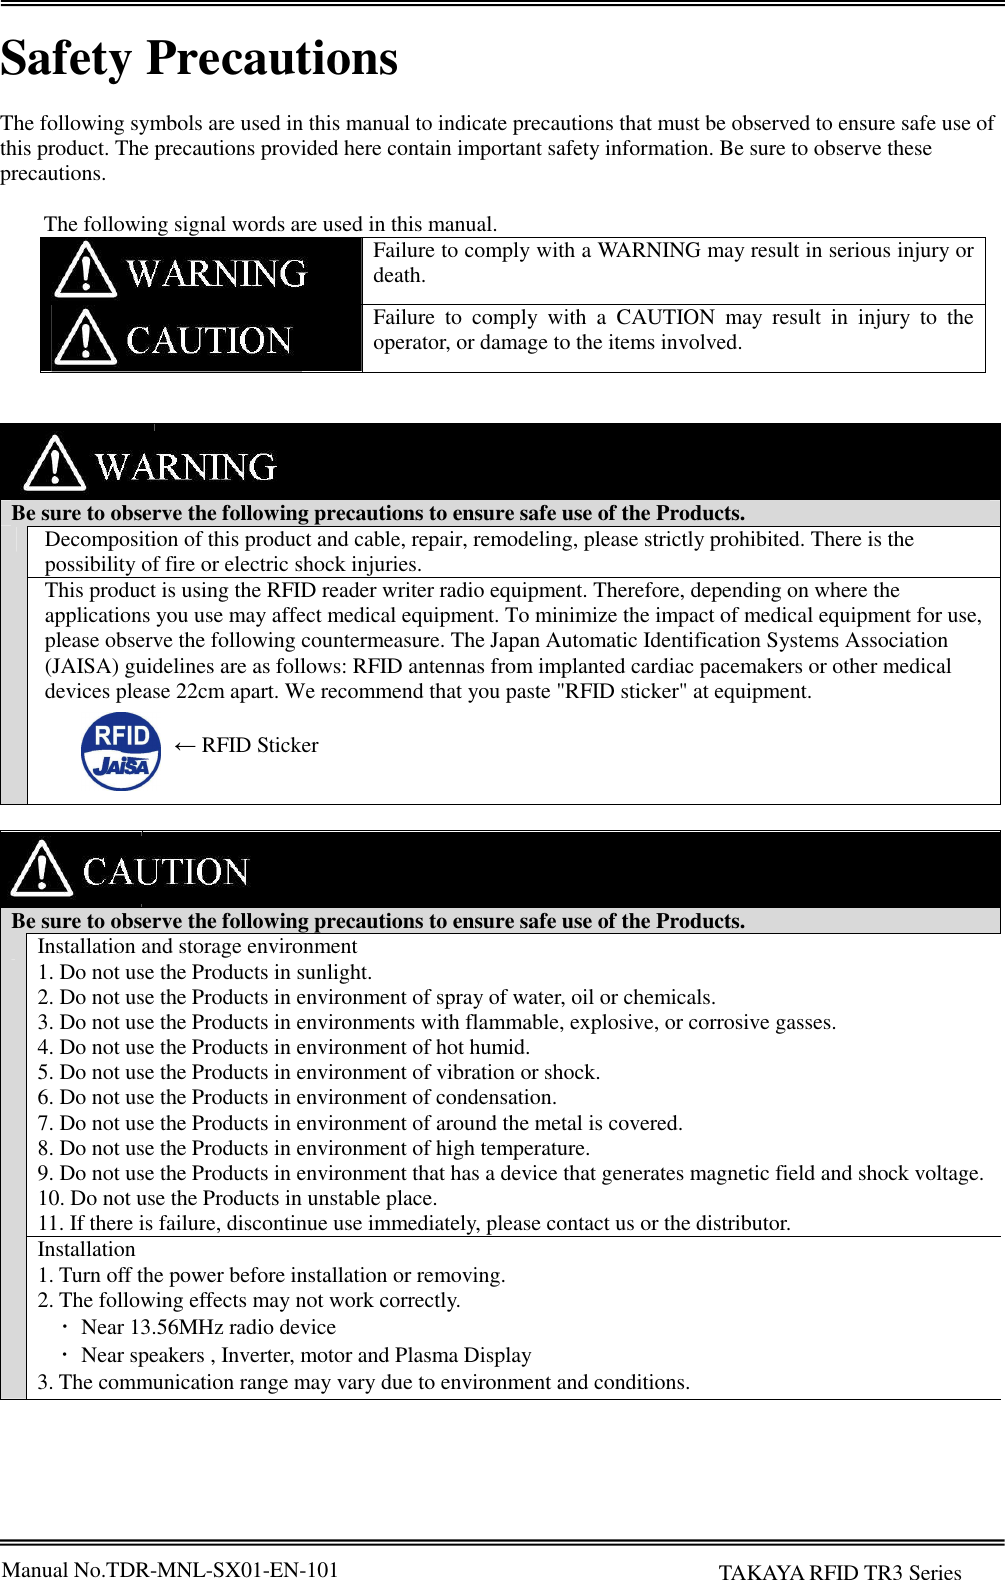 Manual No.TDR-MNL-SX01-EN-101       TAKAYA RFID TR3 Series  Safety Precautions  The following symbols are used in this manual to indicate precautions that must be observed to ensure safe use of this product. The precautions provided here contain important safety information. Be sure to observe these precautions.    The following signal words are used in this manual.  Failure to comply with a WARNING may result in serious injury or death.  Failure  to  comply  with  a  CAUTION  may  result  in  injury  to  the operator, or damage to the items involved.       Be sure to observe the following precautions to ensure safe use of the Products.  Decomposition of this product and cable, repair, remodeling, please strictly prohibited. There is the possibility of fire or electric shock injuries. This product is using the RFID reader writer radio equipment. Therefore, depending on where the applications you use may affect medical equipment. To minimize the impact of medical equipment for use, please observe the following countermeasure. The Japan Automatic Identification Systems Association (JAISA) guidelines are as follows: RFID antennas from implanted cardiac pacemakers or other medical devices please 22cm apart. We recommend that you paste &quot;RFID sticker&quot; at equipment.          Be sure to observe the following precautions to ensure safe use of the Products.  Installation and storage environment 1. Do not use the Products in sunlight. 2. Do not use the Products in environment of spray of water, oil or chemicals. 3. Do not use the Products in environments with flammable, explosive, or corrosive gasses. 4. Do not use the Products in environment of hot humid. 5. Do not use the Products in environment of vibration or shock. 6. Do not use the Products in environment of condensation. 7. Do not use the Products in environment of around the metal is covered. 8. Do not use the Products in environment of high temperature. 9. Do not use the Products in environment that has a device that generates magnetic field and shock voltage. 10. Do not use the Products in unstable place. 11. If there is failure, discontinue use immediately, please contact us or the distributor. Installation 1. Turn off the power before installation or removing. 2. The following effects may not work correctly.     ･  Near 13.56MHz radio device     ･  Near speakers , Inverter, motor and Plasma Display 3. The communication range may vary due to environment and conditions.   ← RFID Sticker 